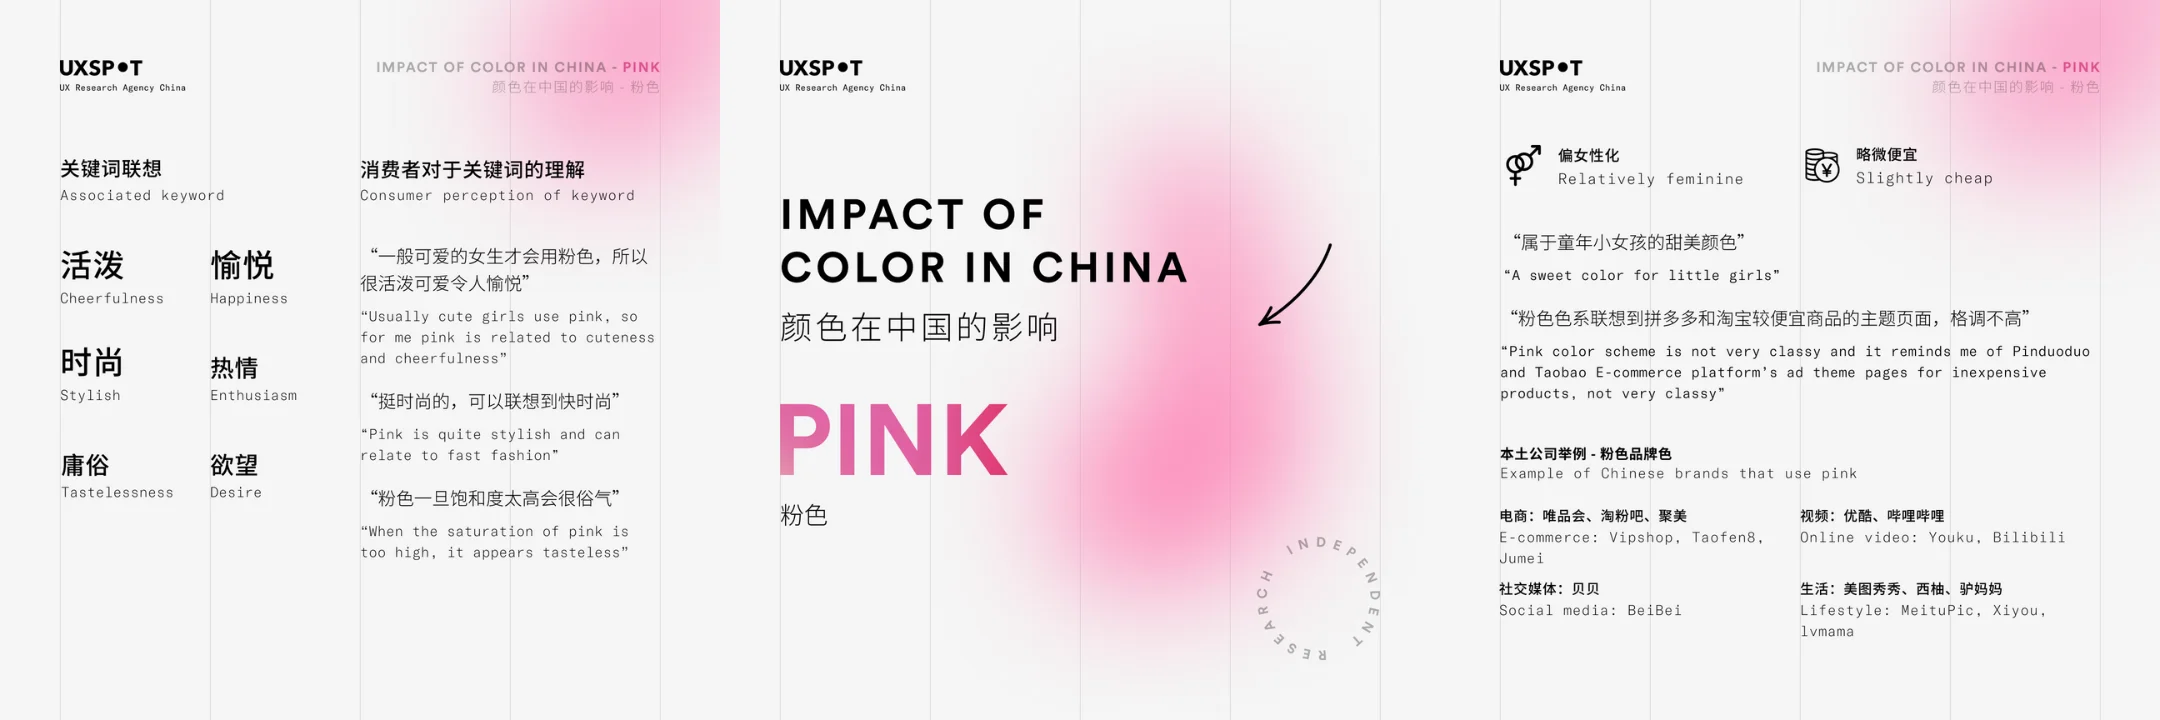 color psychology China color pink data summary